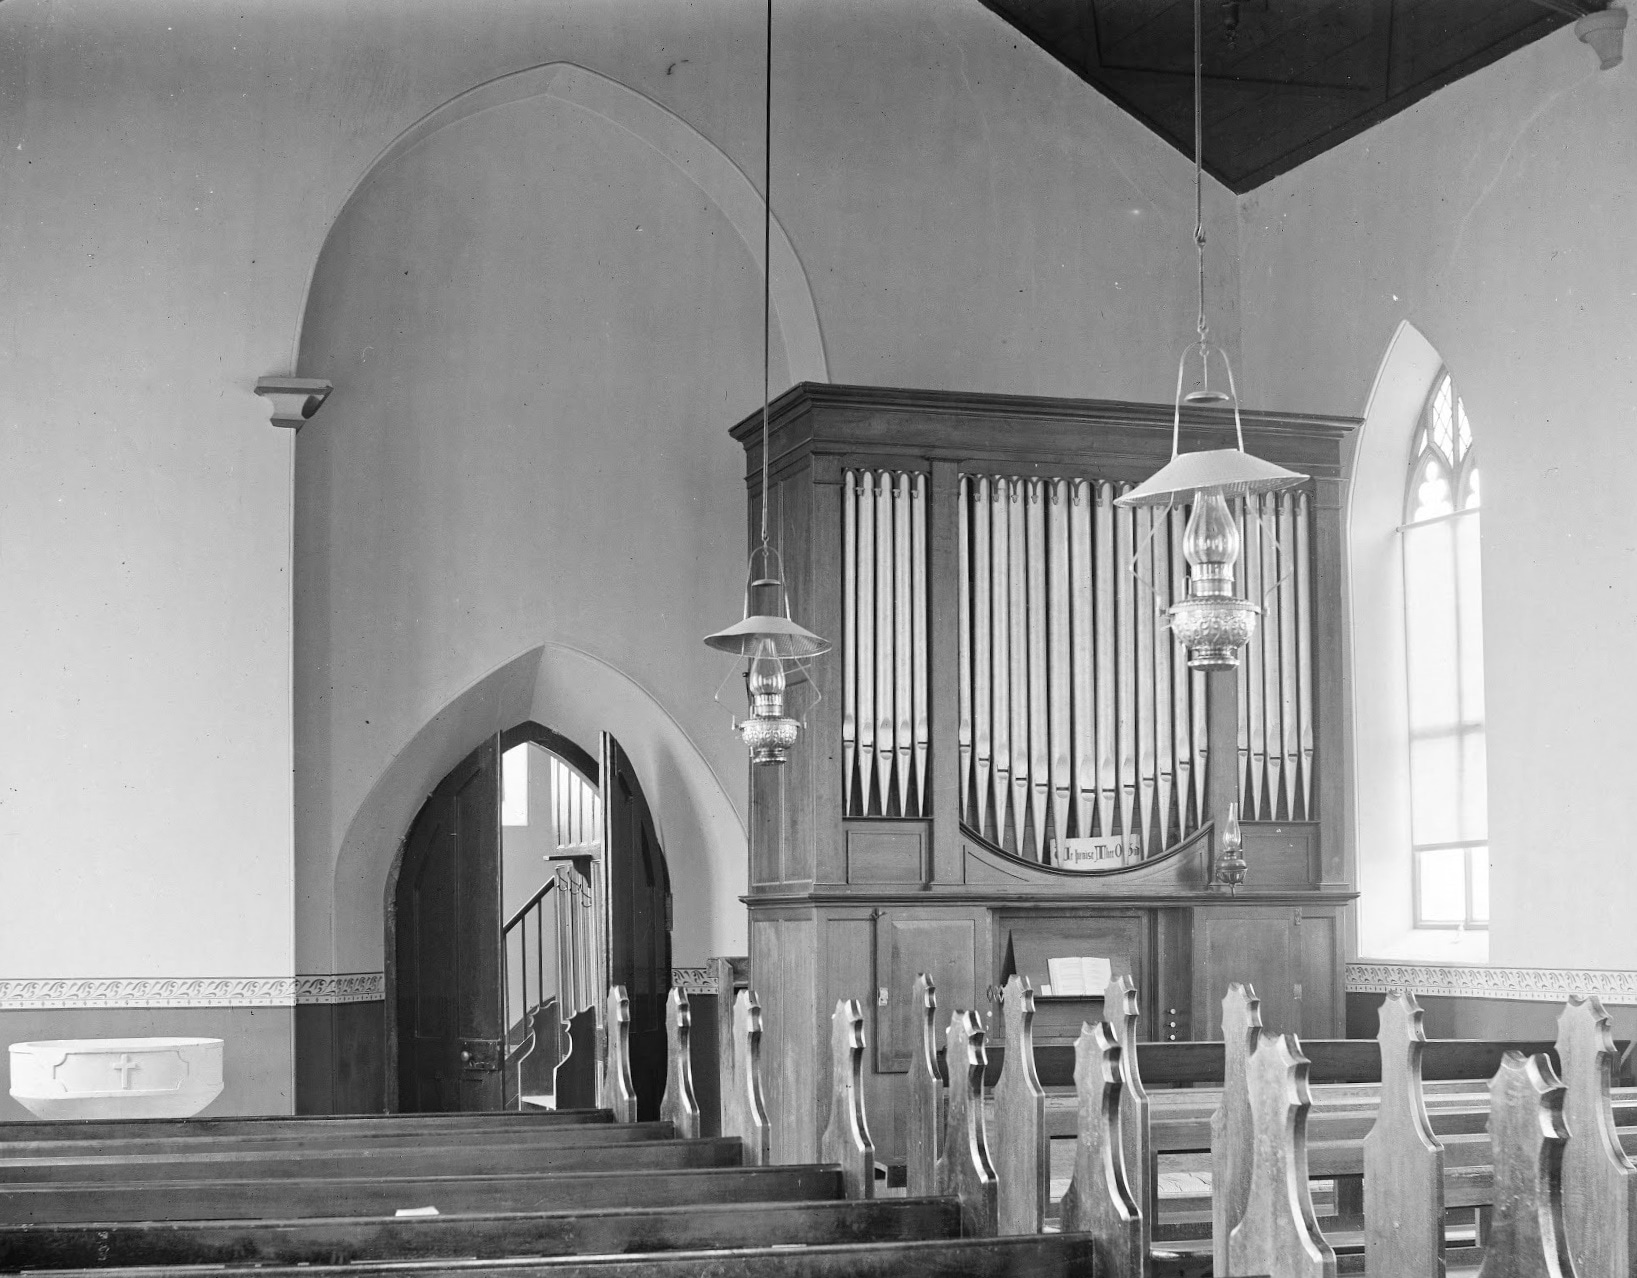 Organ, by John Gray of London, 1824, installed in St. David's, Hobart, 1825, as later pictured at St. Matthew's, Rokeby